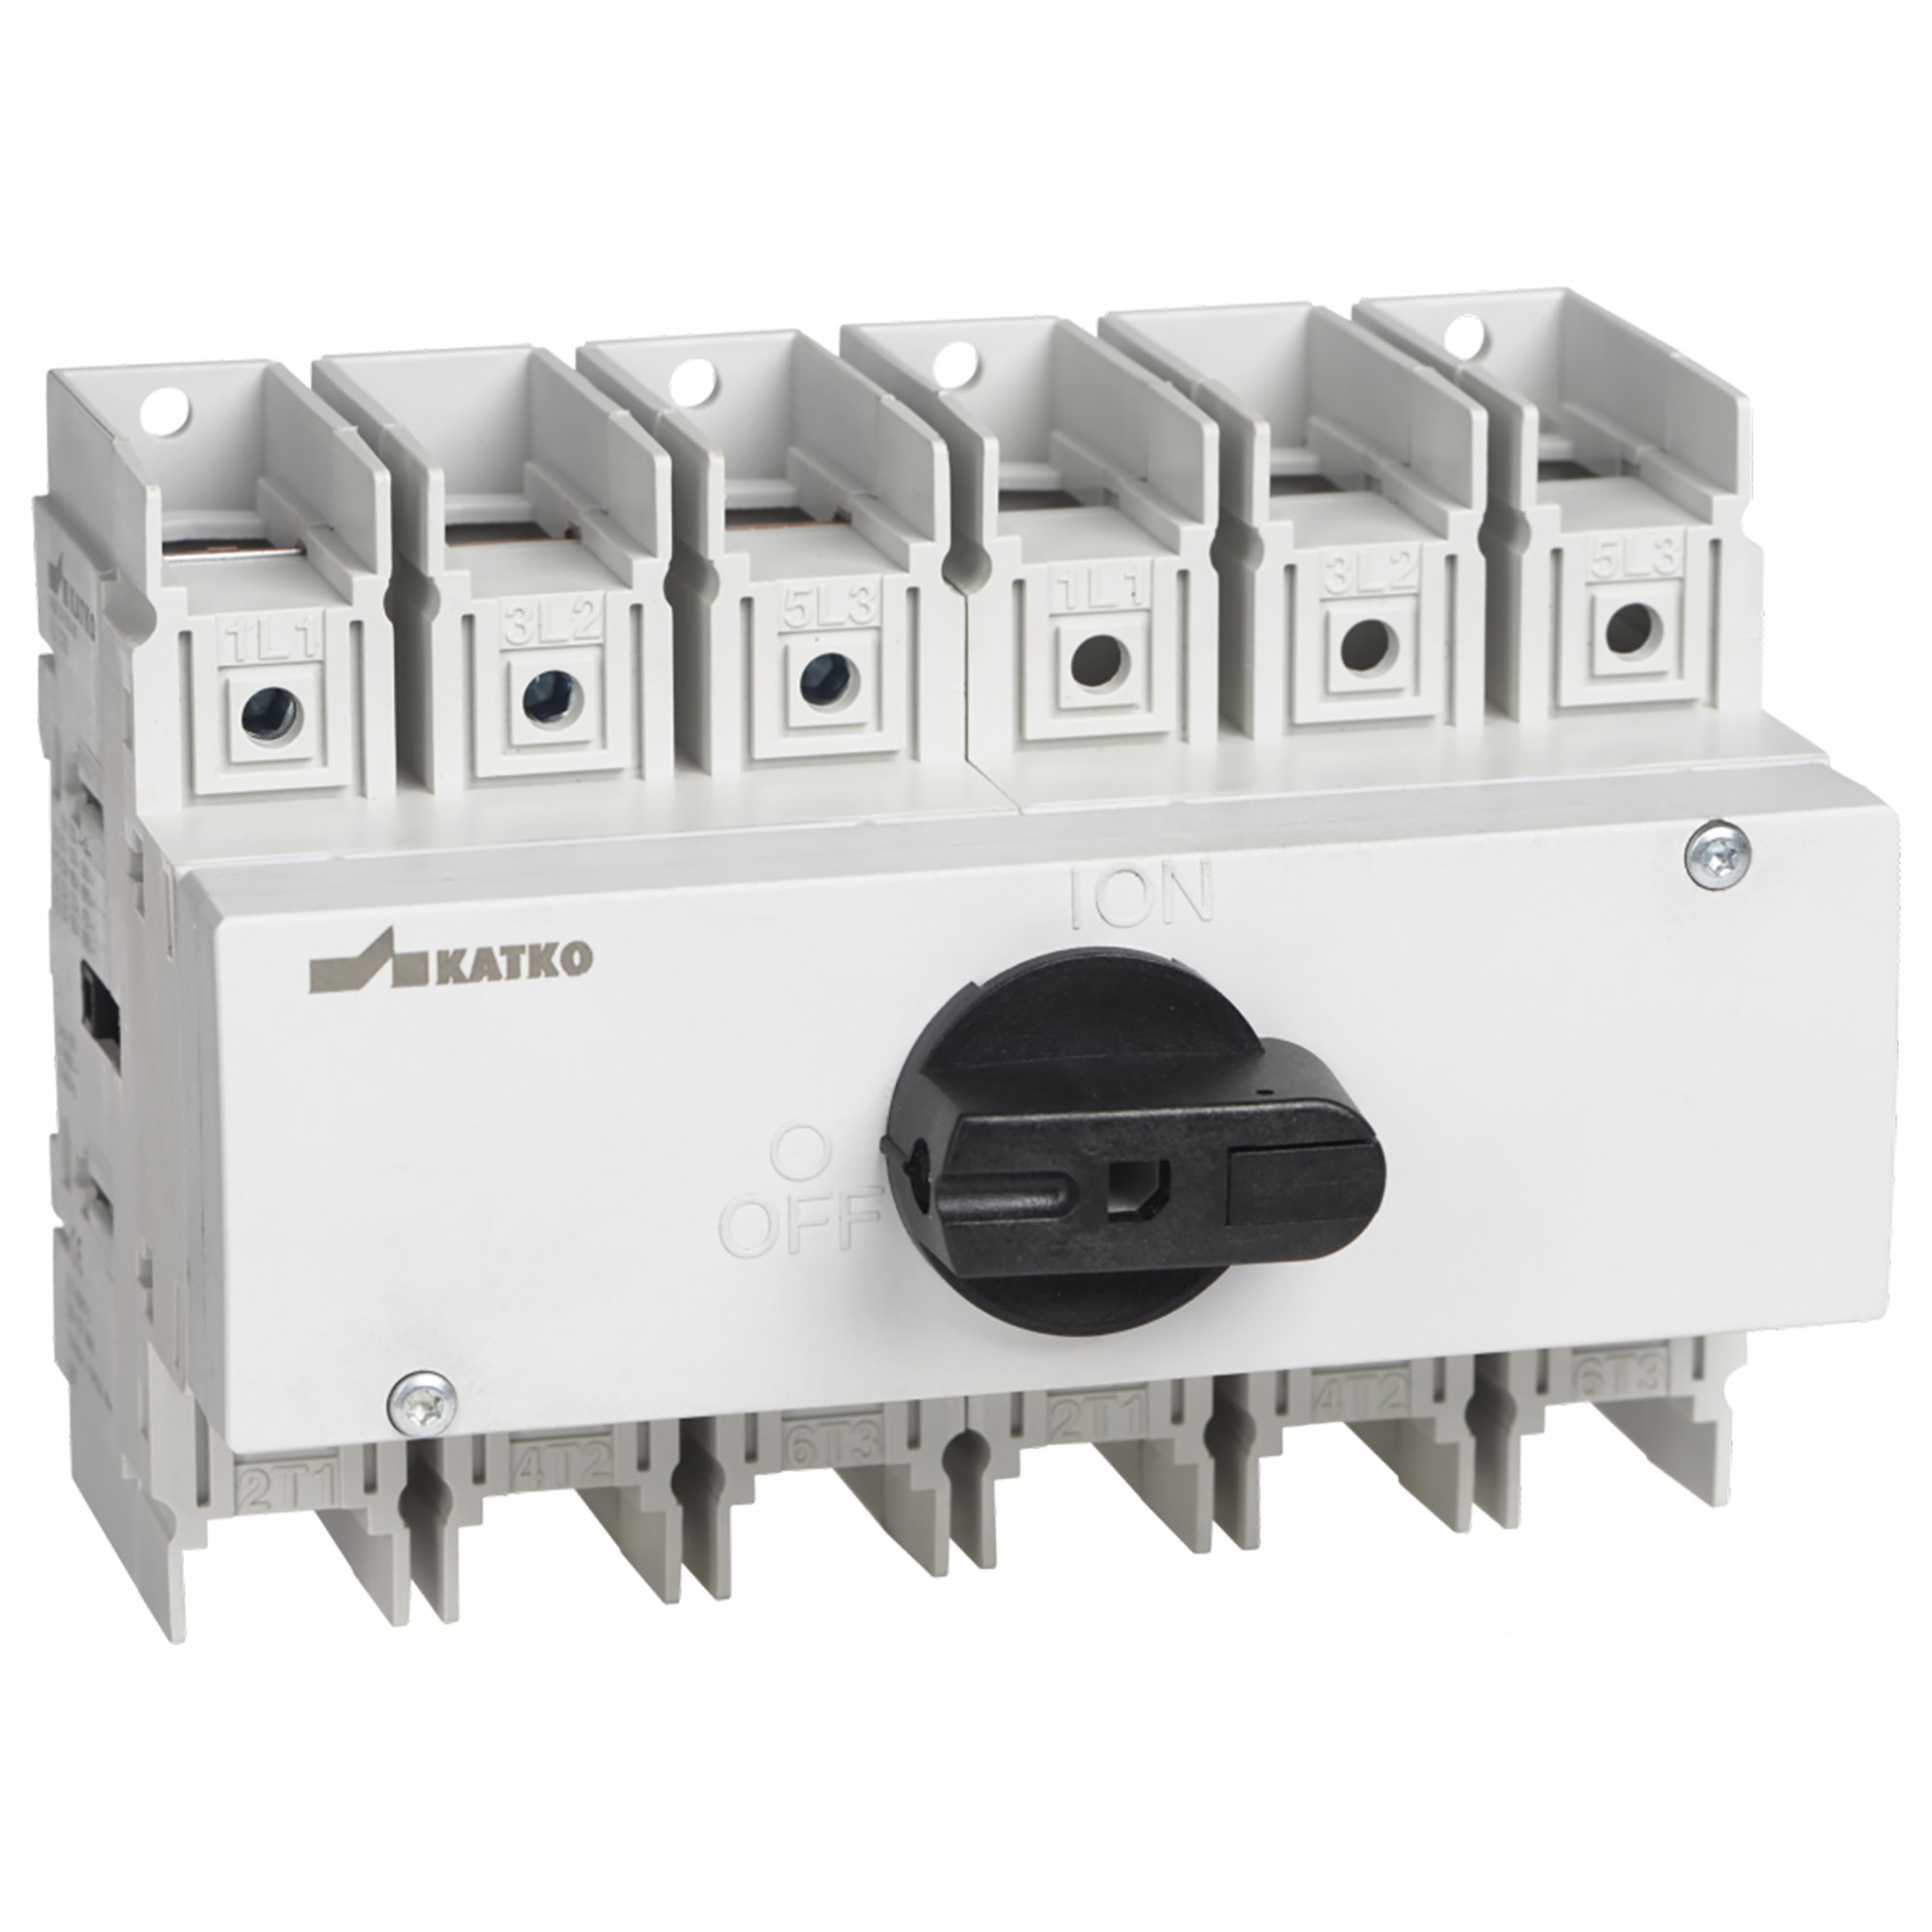 62-KU 6100 KU 16-160A 3- and 4-pole IN/OUT, compact, suitable for DIN-EN rail. The 4-pole version is also available with early-make and late-break neutral pole. The silver contactsensures safe and durable operation. Series KU modular design.